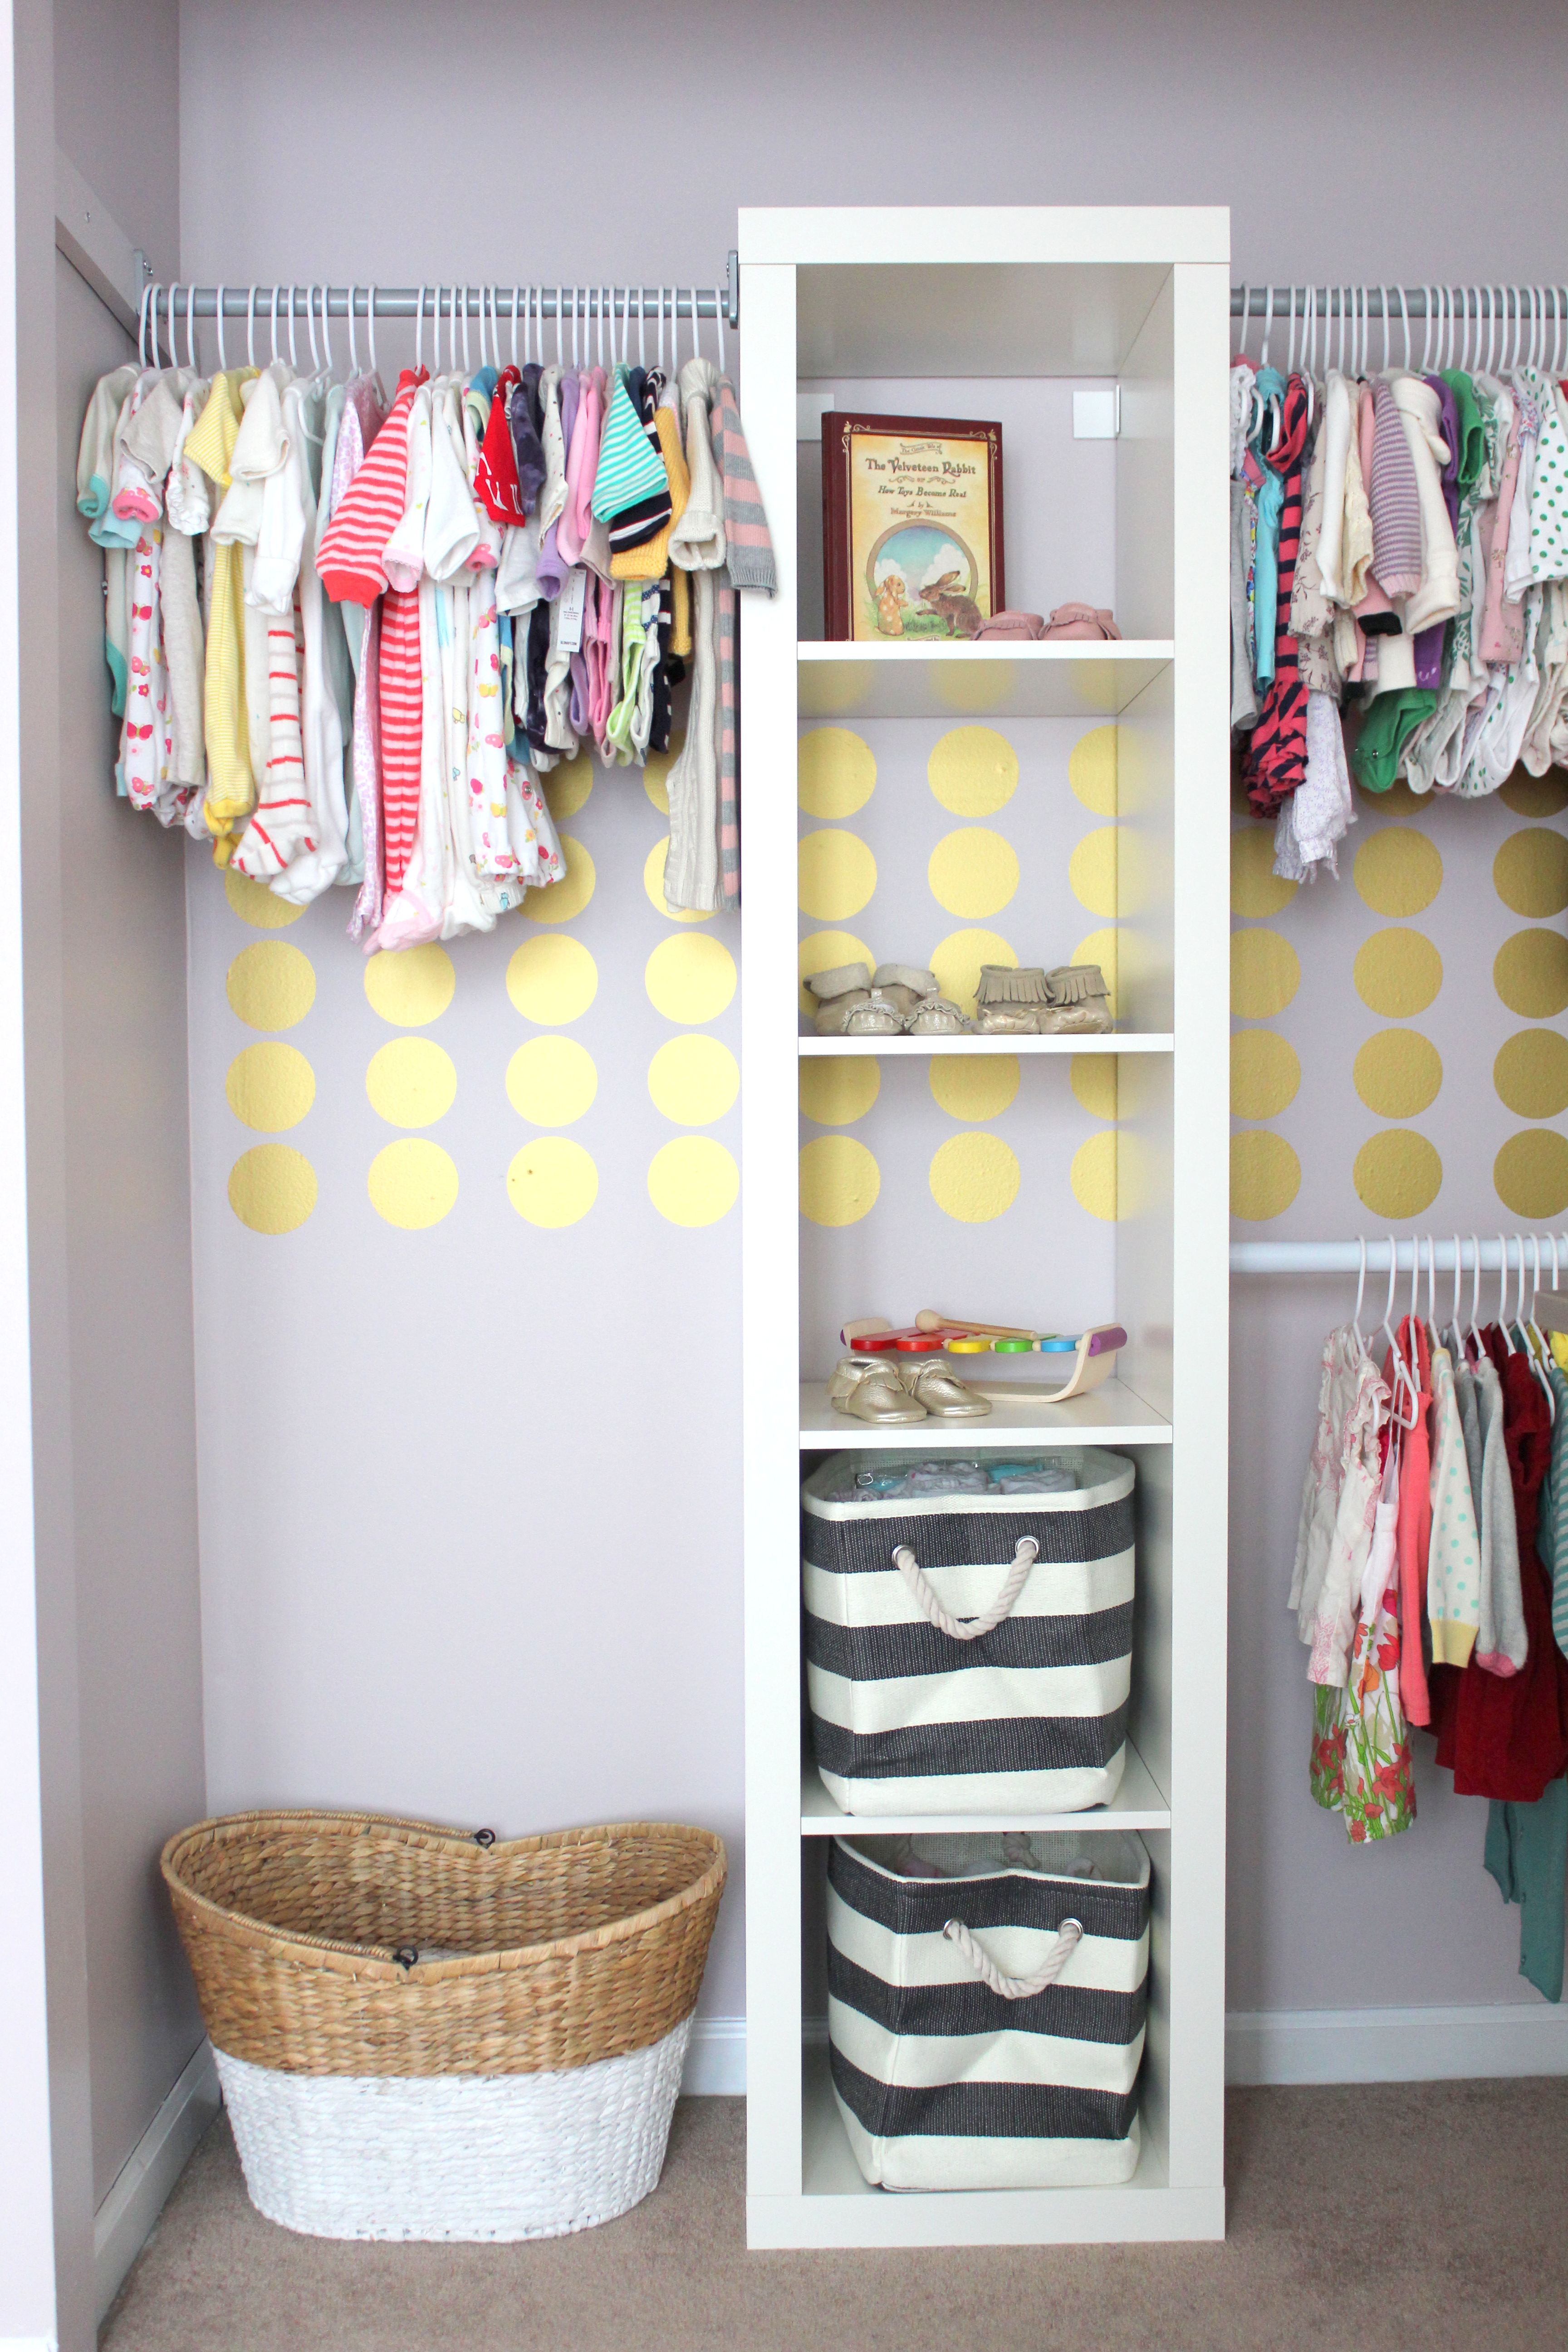 Gold Accent Dots in the Closet